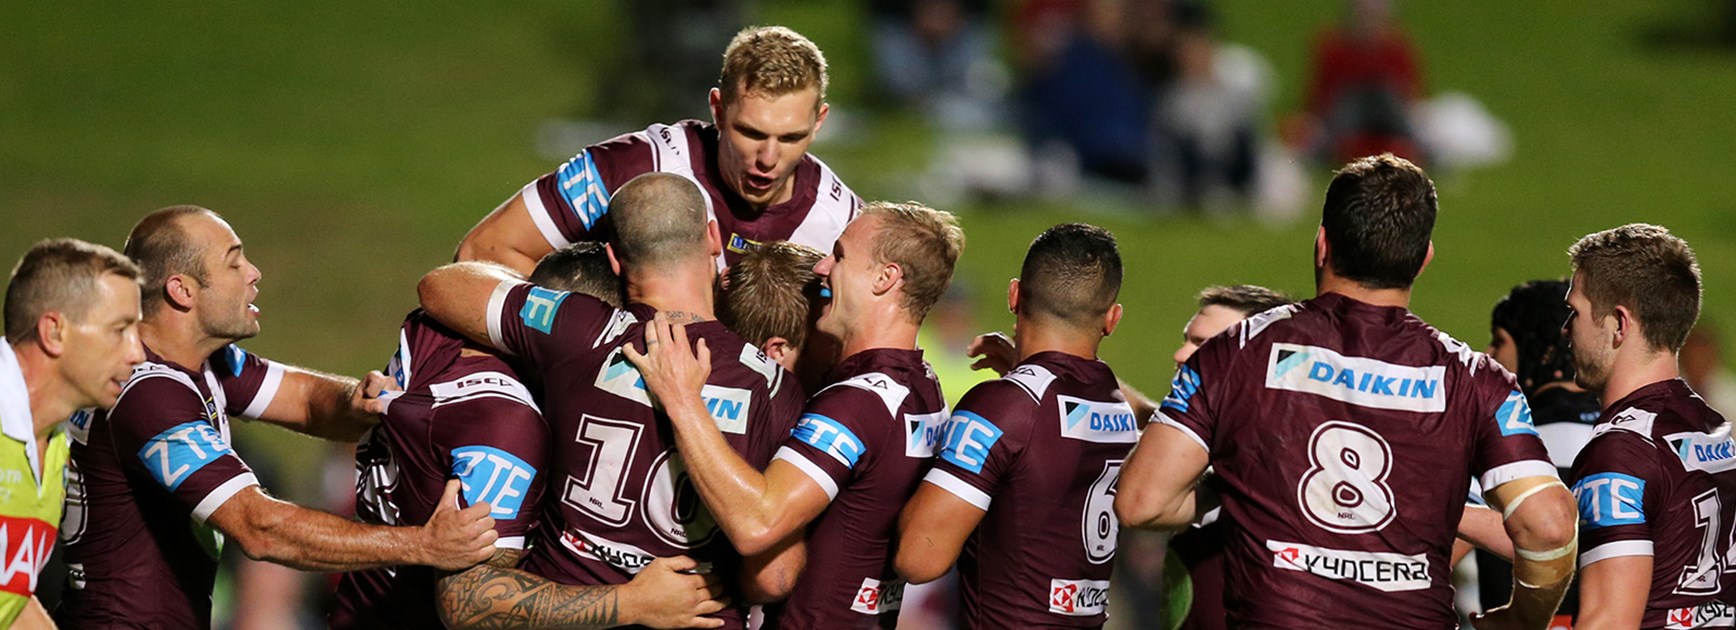 Manly celebrates their first win of the season, with victory over the Sharks at Brookvale Oval.